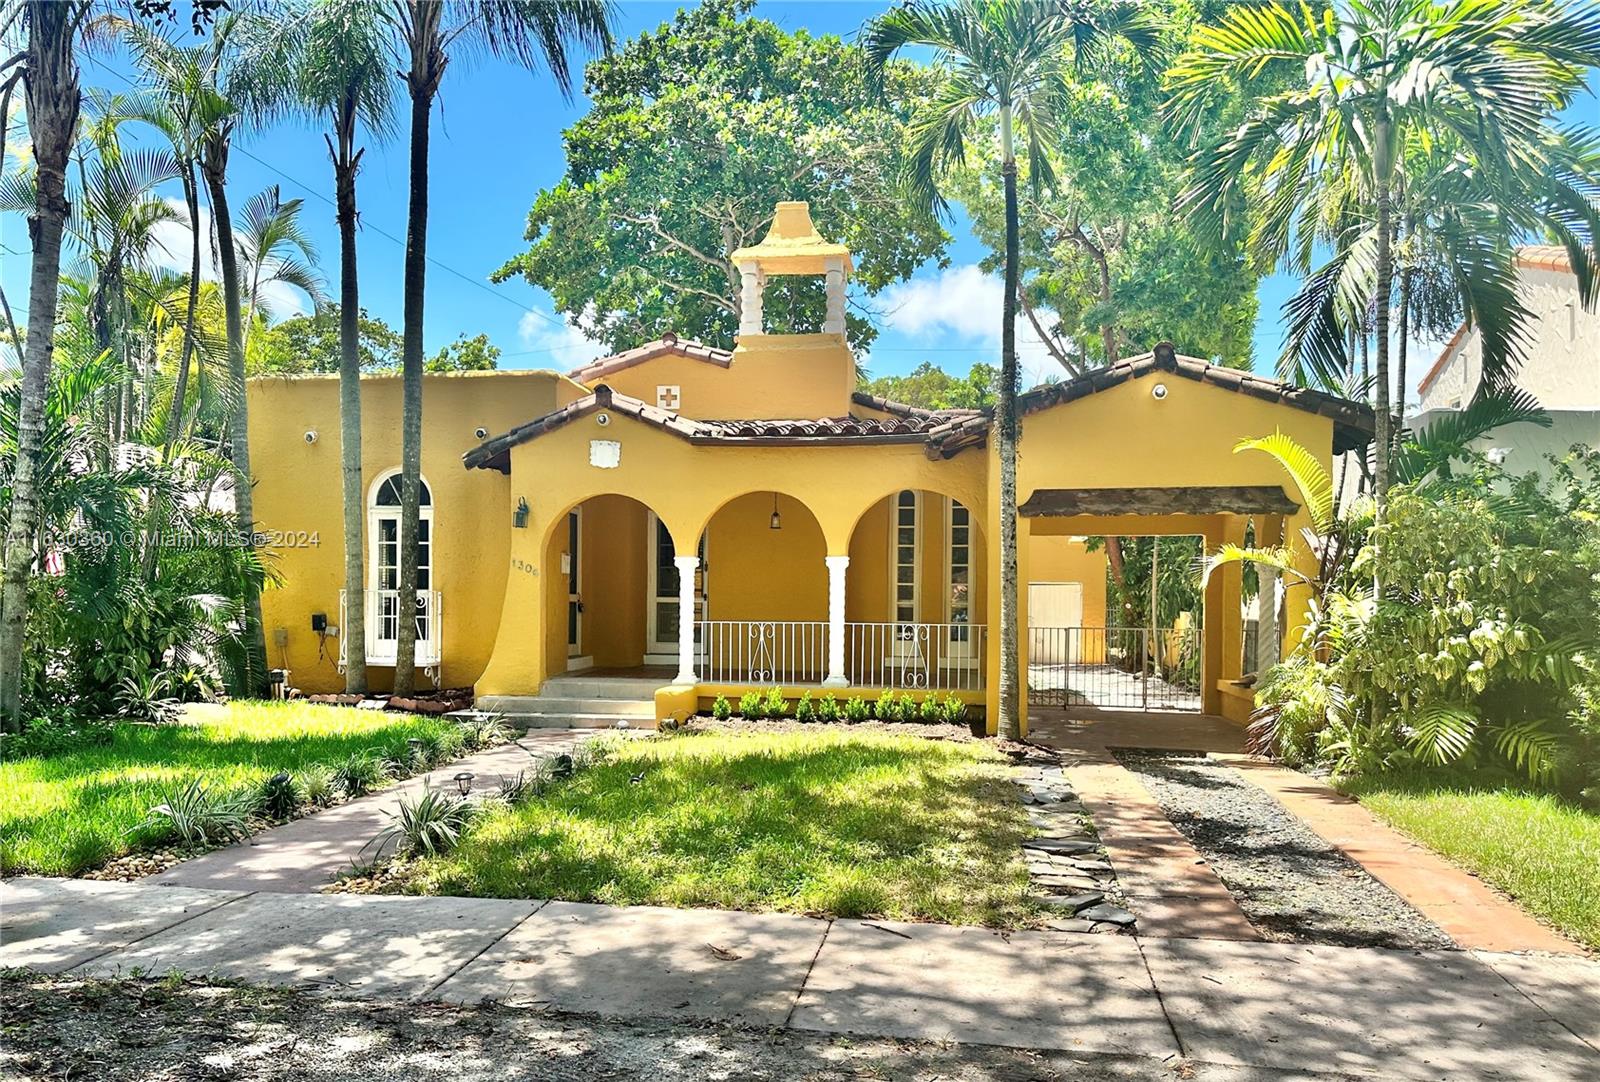 2/1 + Sunroom in Main House & 1/1 Cottage. Beautiful Old Spanish 1924, George Merrick home exceptionally restored. U shaped with all rooms French doors opening to center Romantic Courtyard.  One of its kind and rarely on the market.